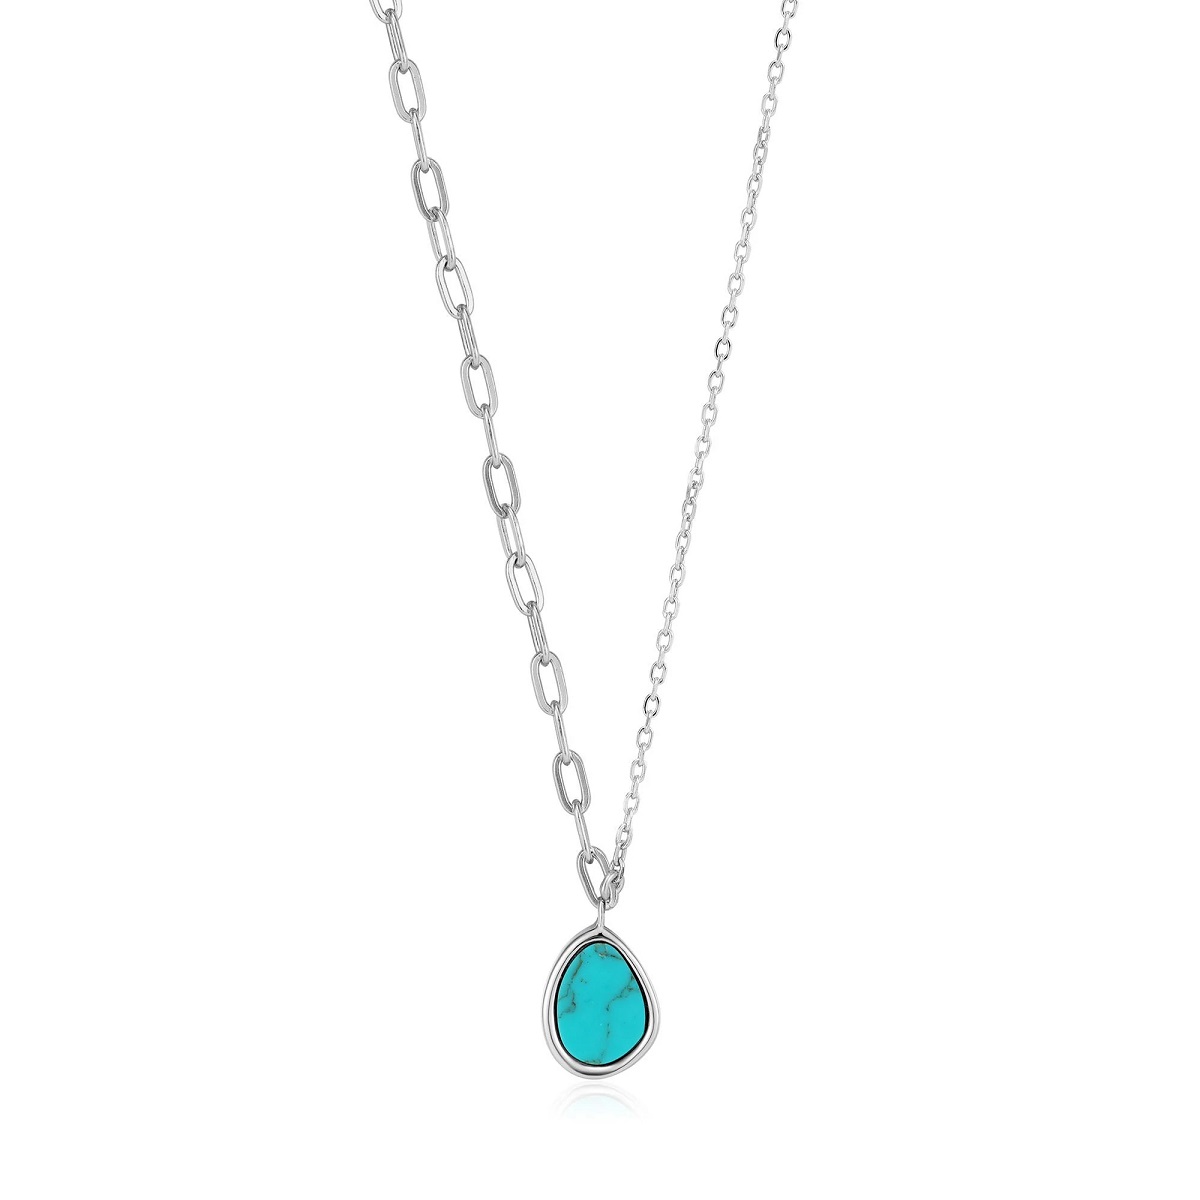 Ania Haie Silver Tidal Turquoise Mixed Link Necklace